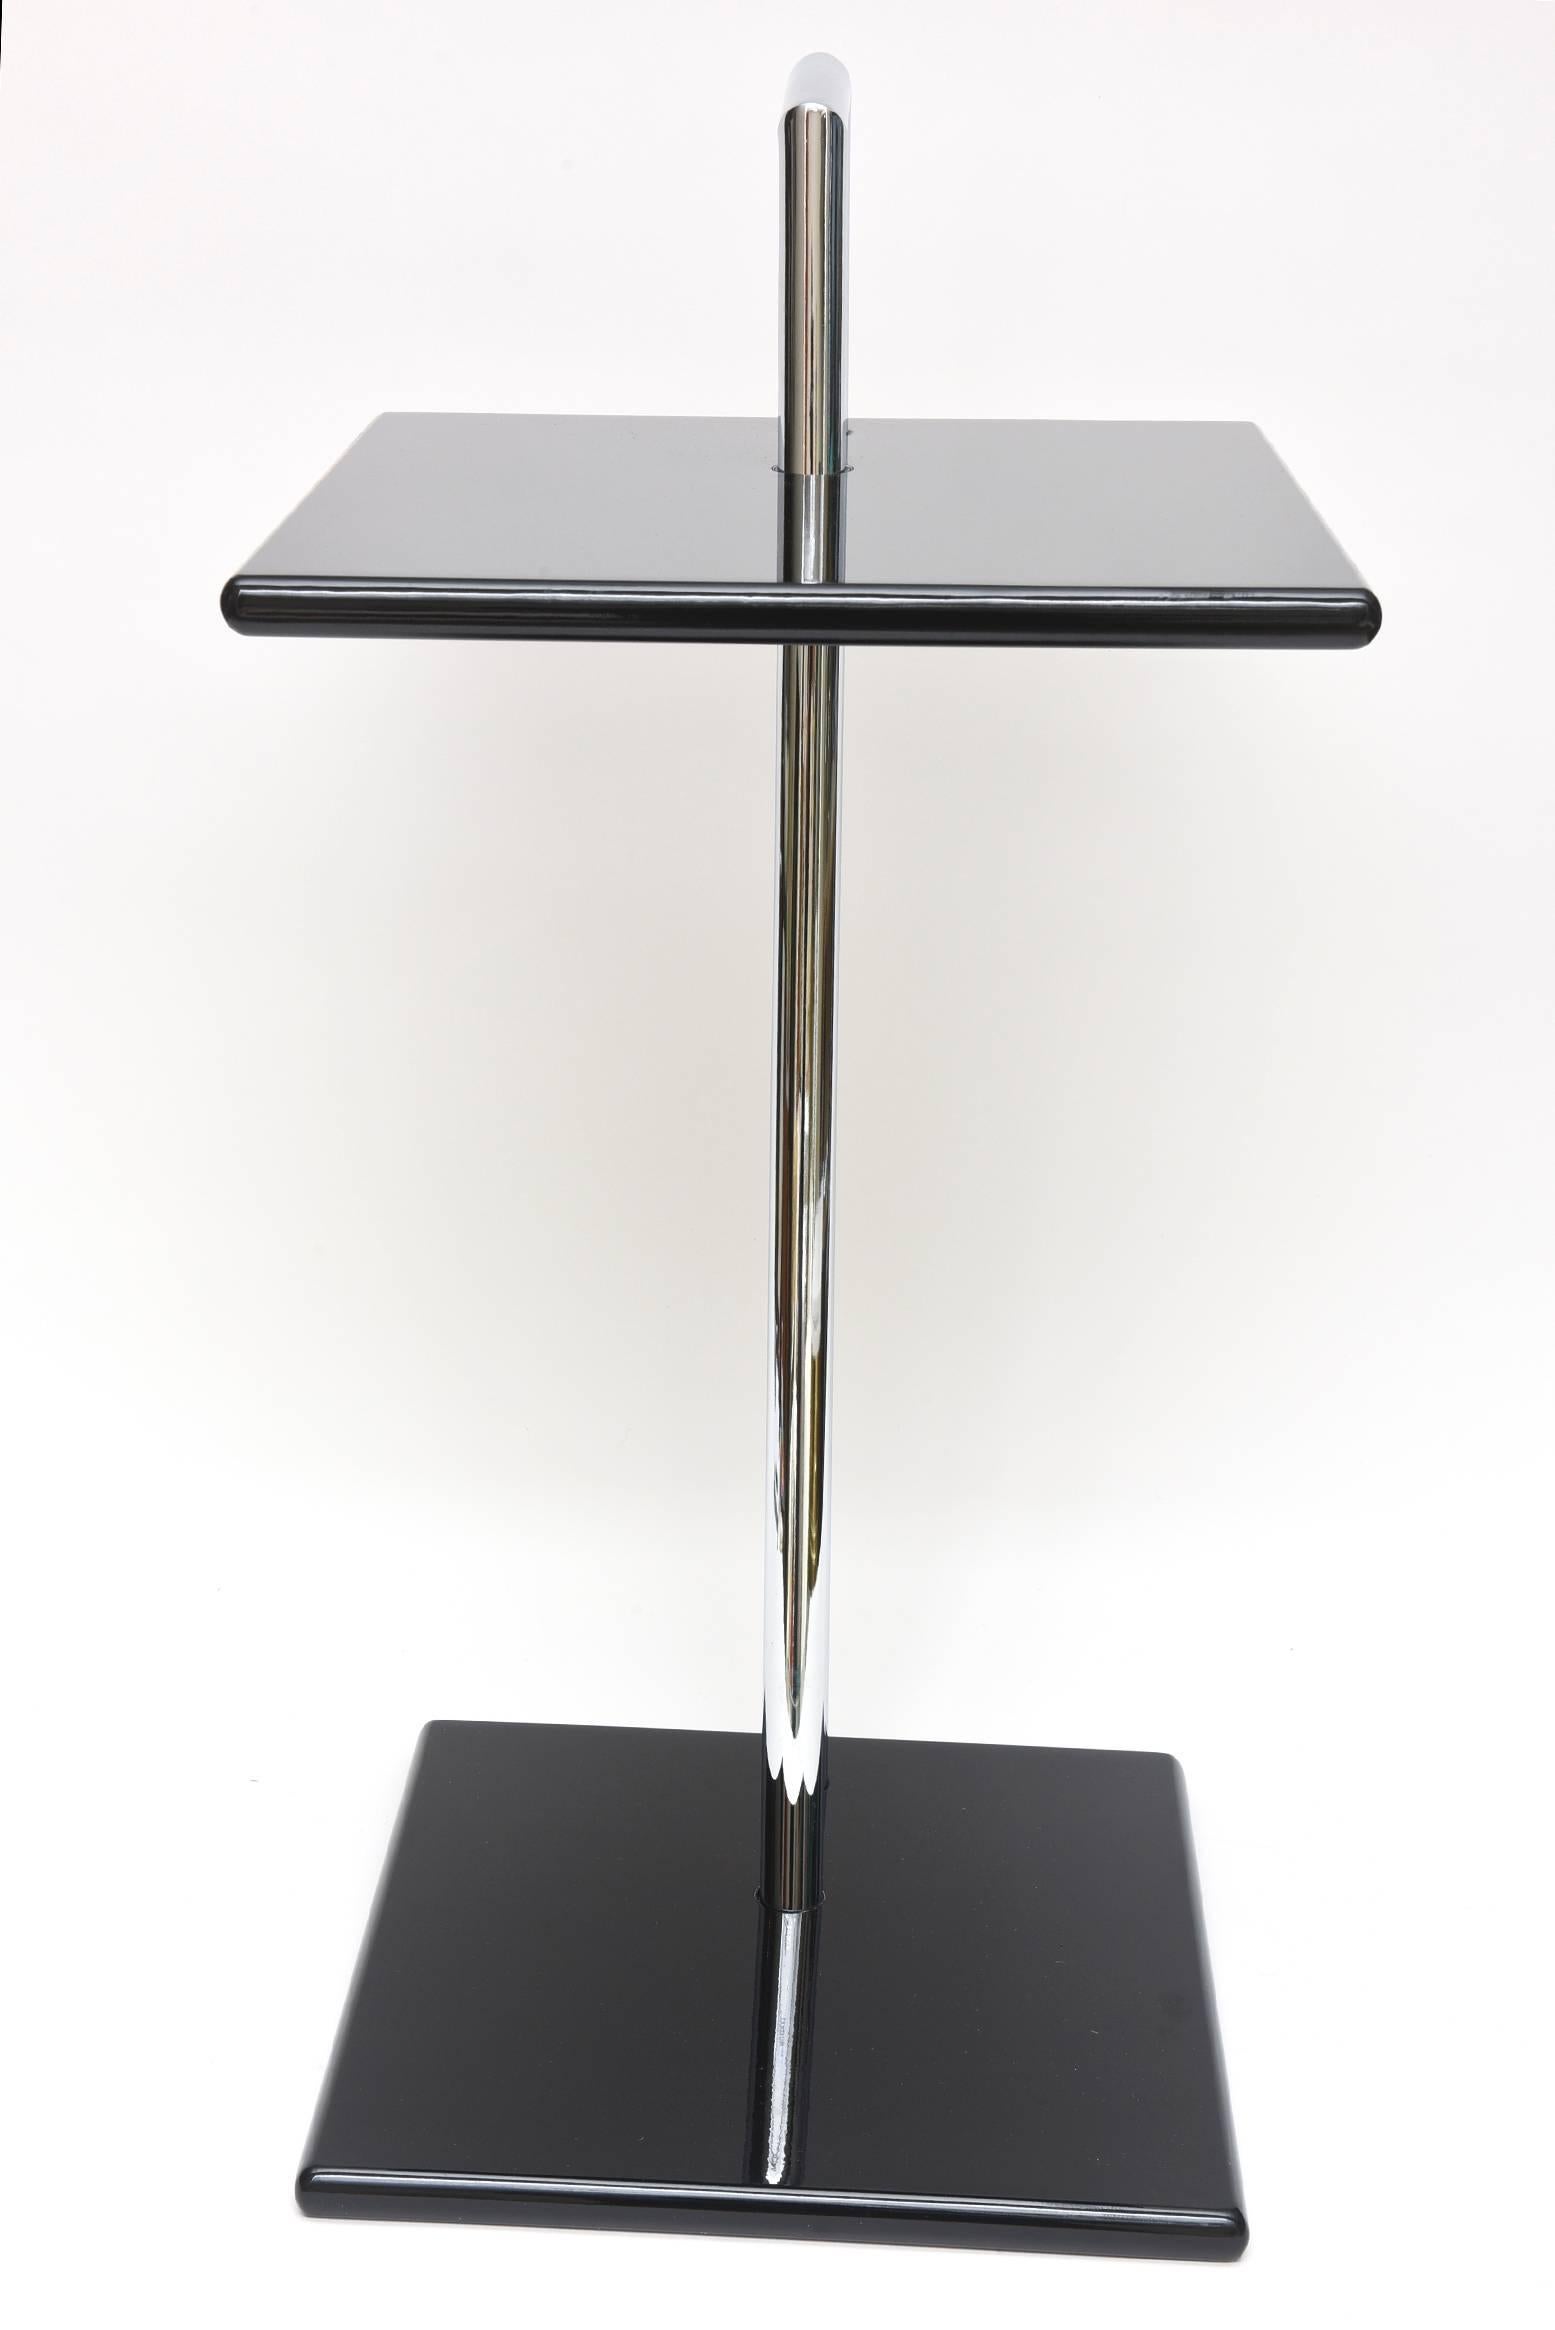  Eileen Gray Second Edition Black Lacquer Wood and Chrome Side Tables/ SALE 2